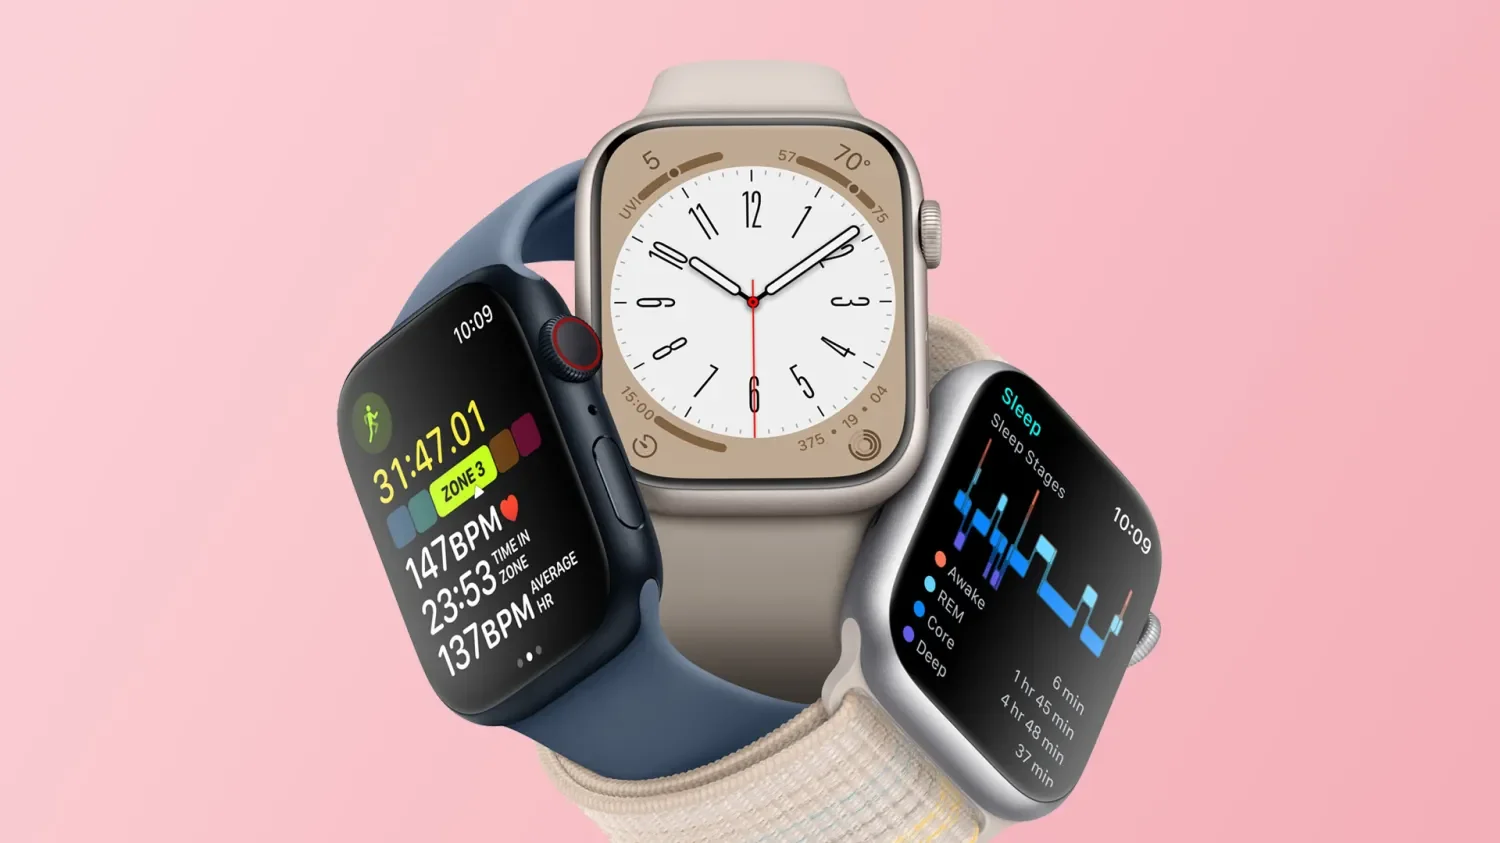 Apple Watch will help users with Parkinson's disease